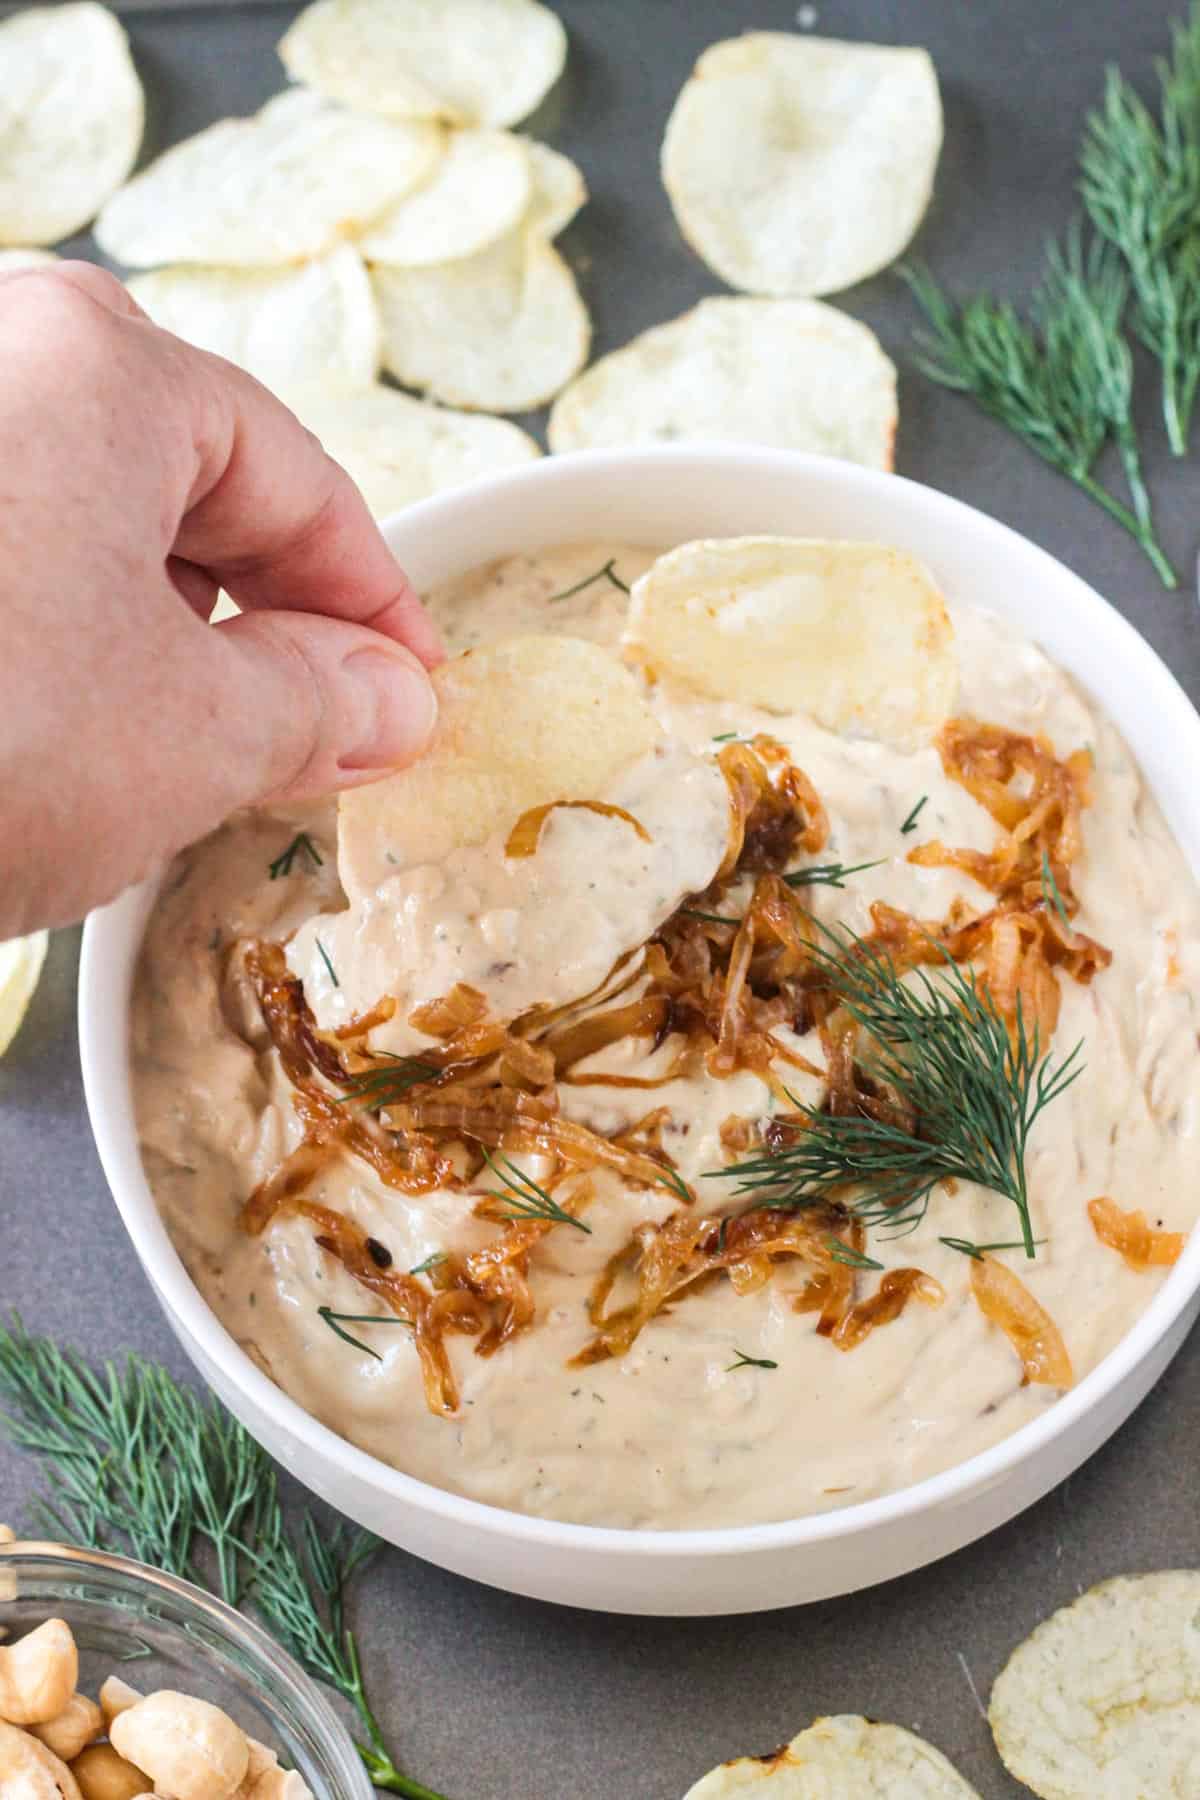 Adult hand dipping a potato chip into a bowl of french onion dip.